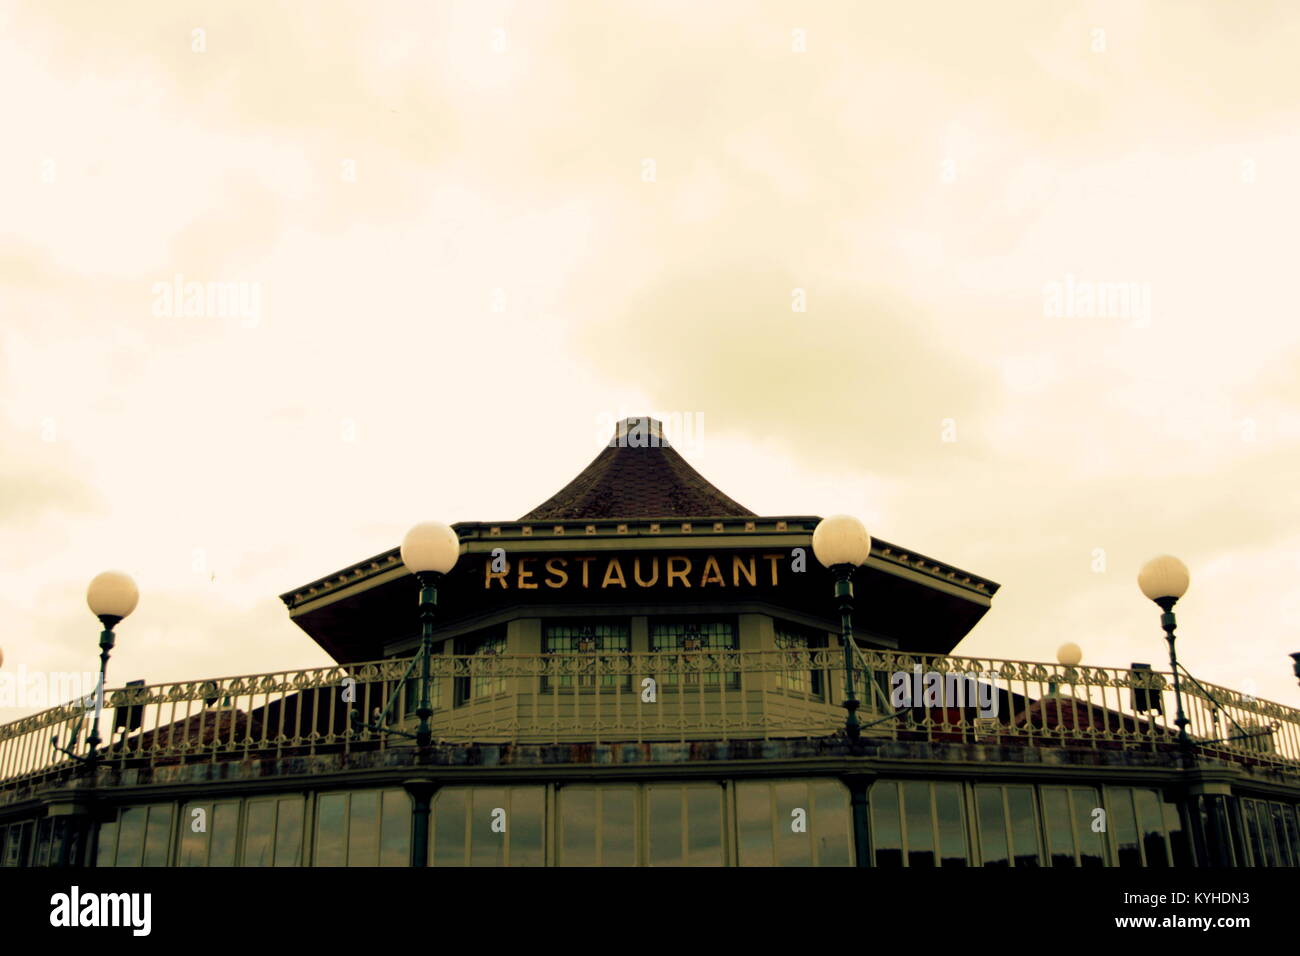 Chinese style abstract anonymous restaurant sign roof Rothesay, United Kingdom Stock Photo